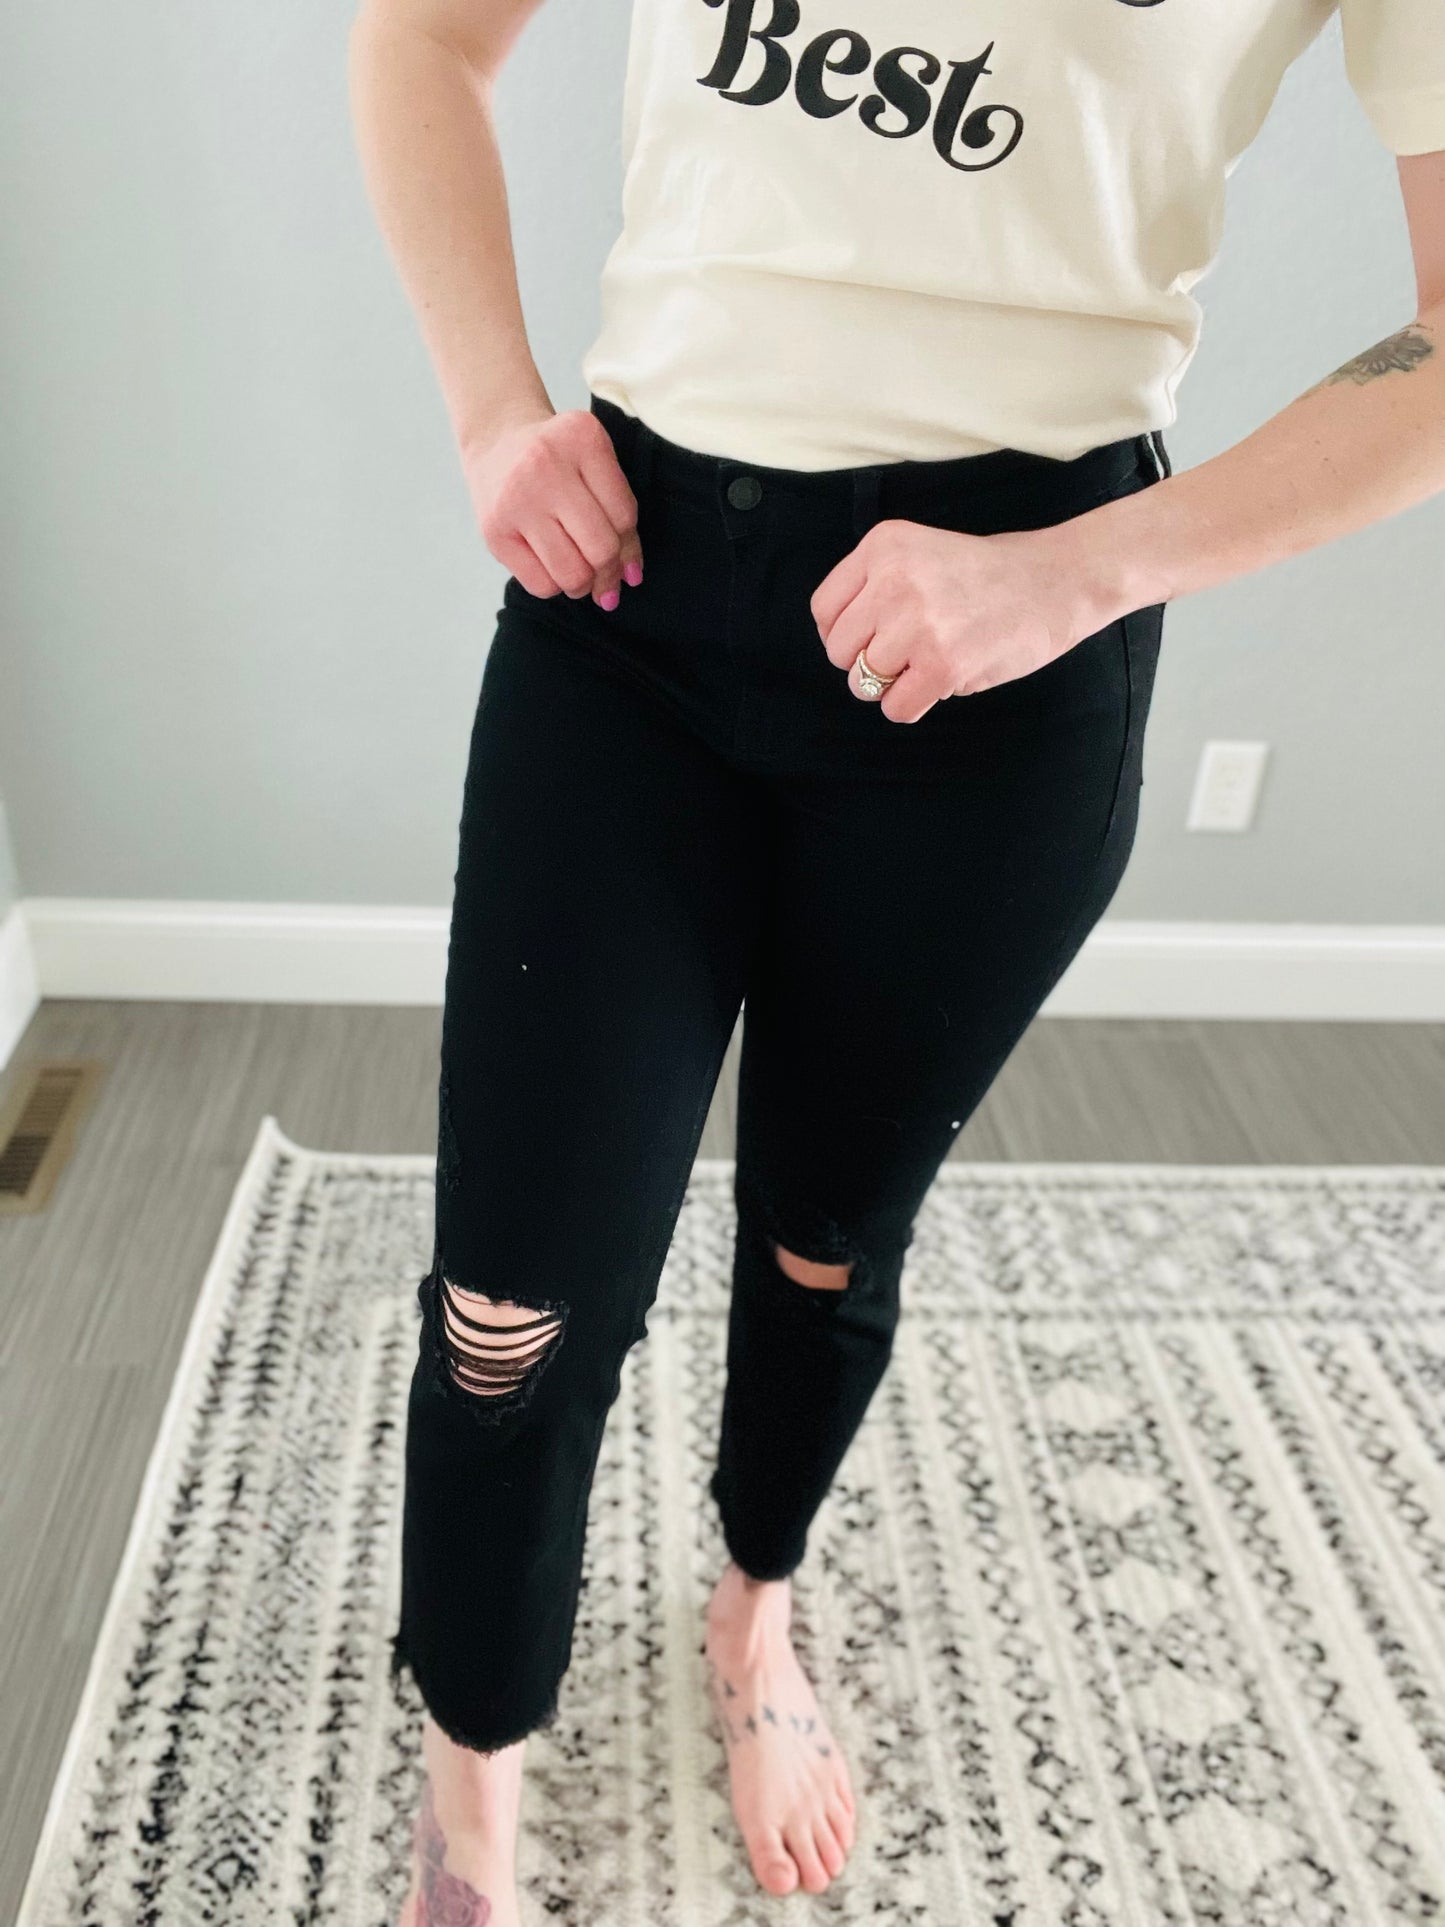 Black Leggings Under Ripped Jeans: Stay Warm + Look Cute - The Mom Edit